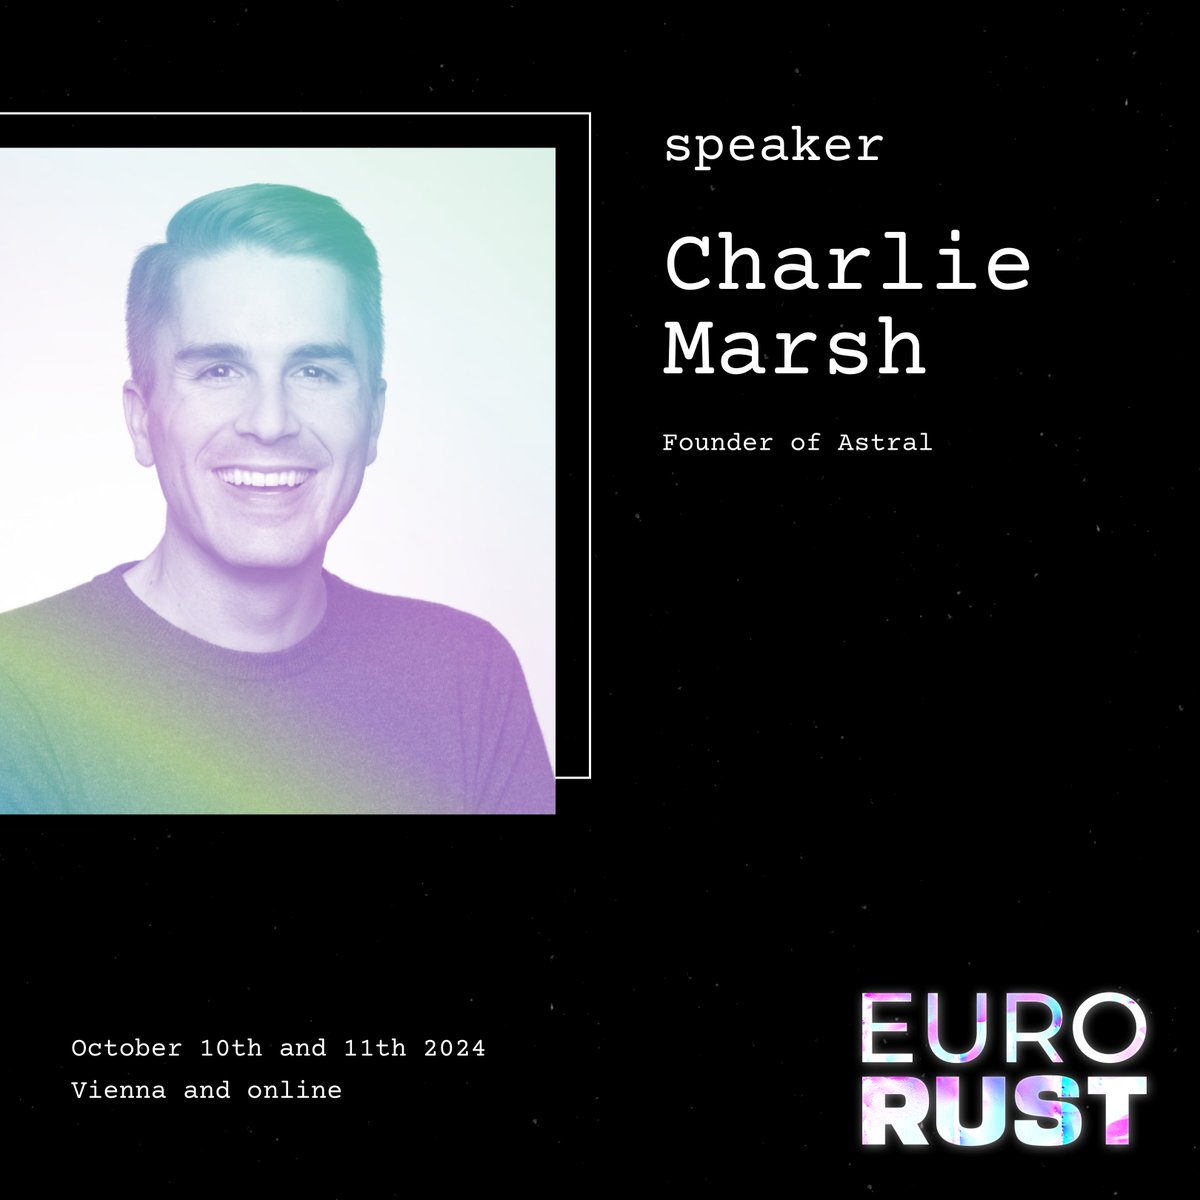 Our first speaker is confirmed! 🚀 We are excited to welcome @charliermarsh, Founder of @astral_sh, at #eurorust24! Stay tuned for more info on our talks schedule and get your ticket here: eurorust.eu